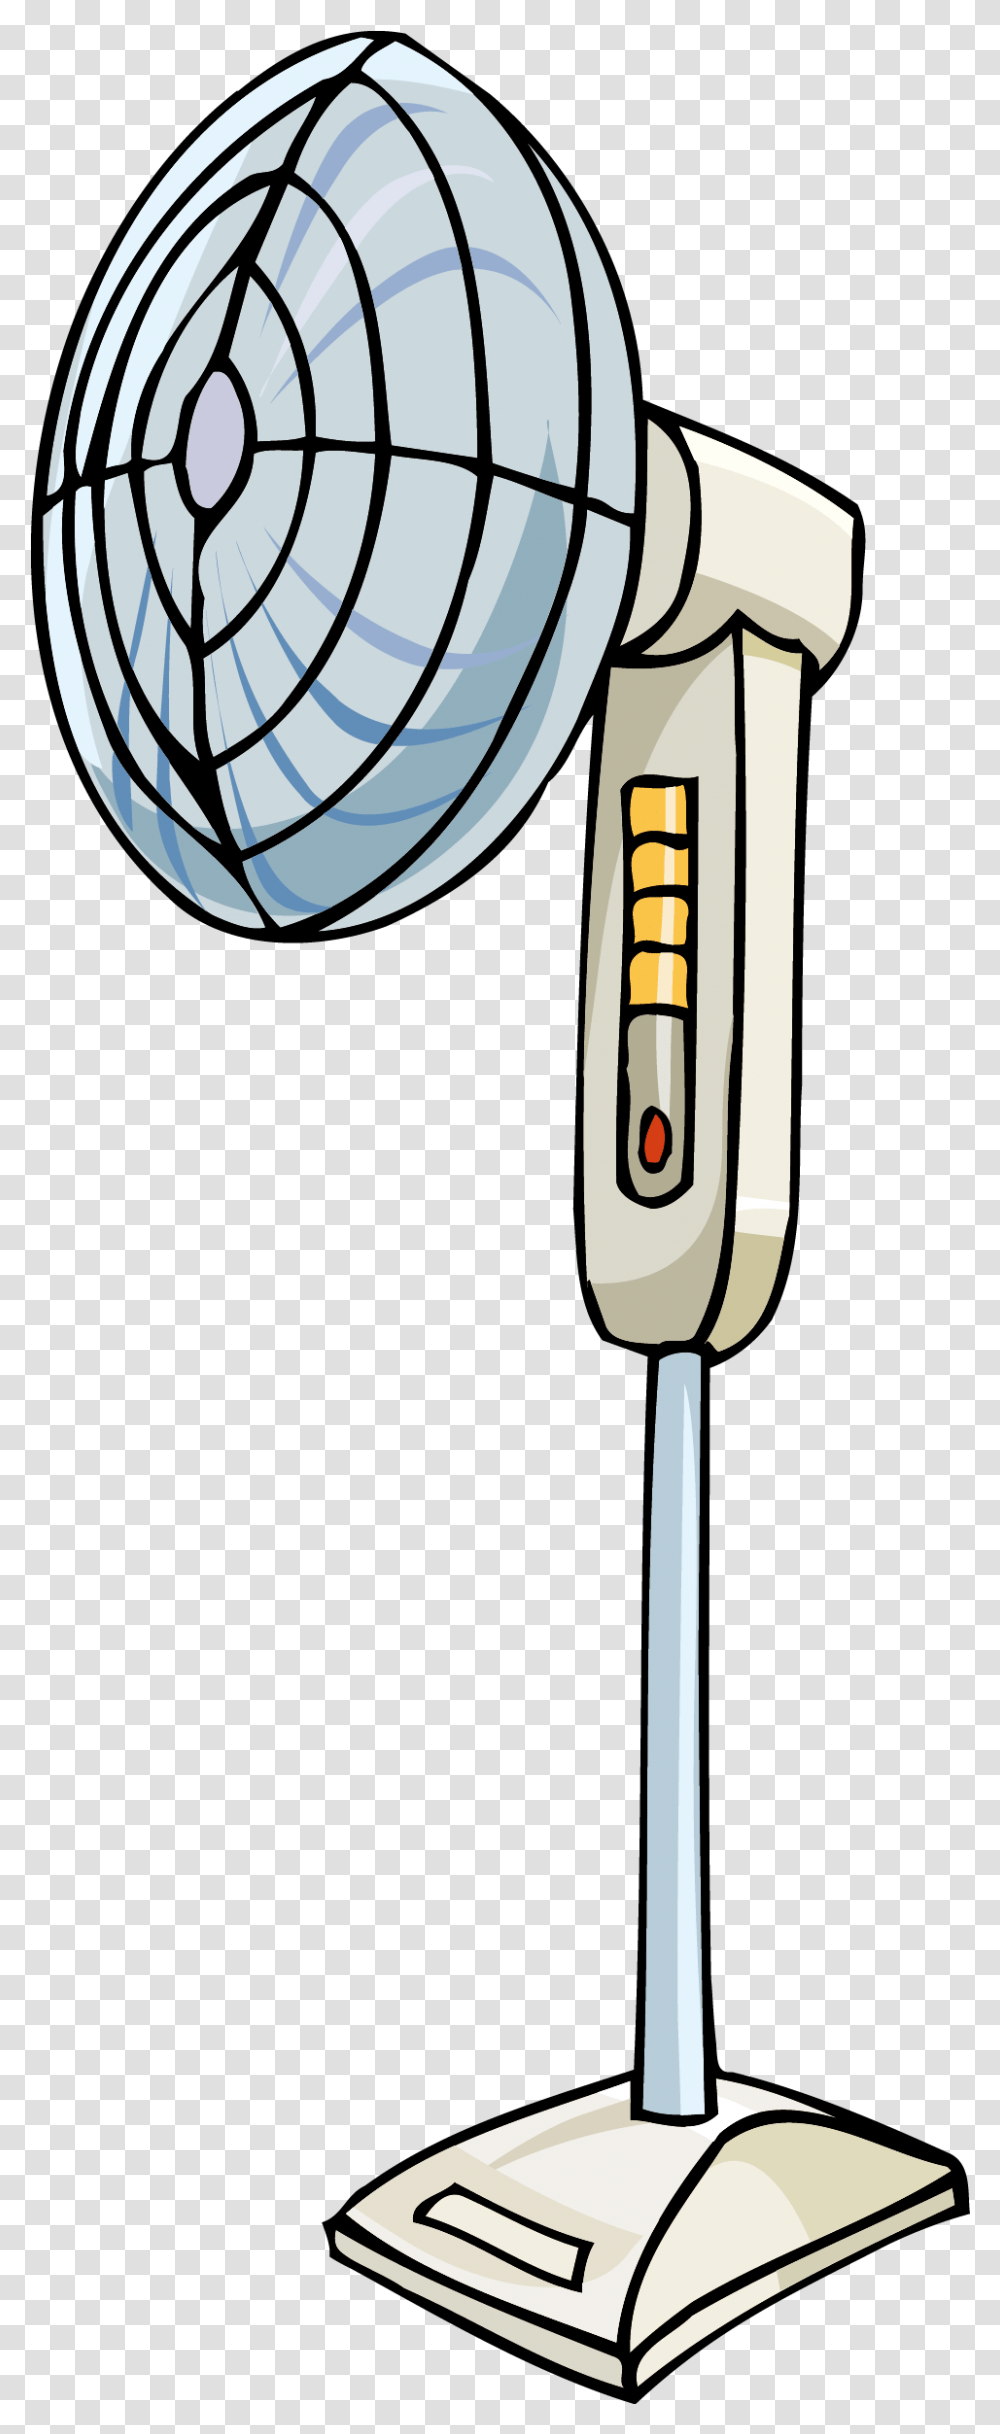 Microphone Clipart Standing Standing Fan Vector, Lamp, Appliance, Steamer, Blow Dryer Transparent Png